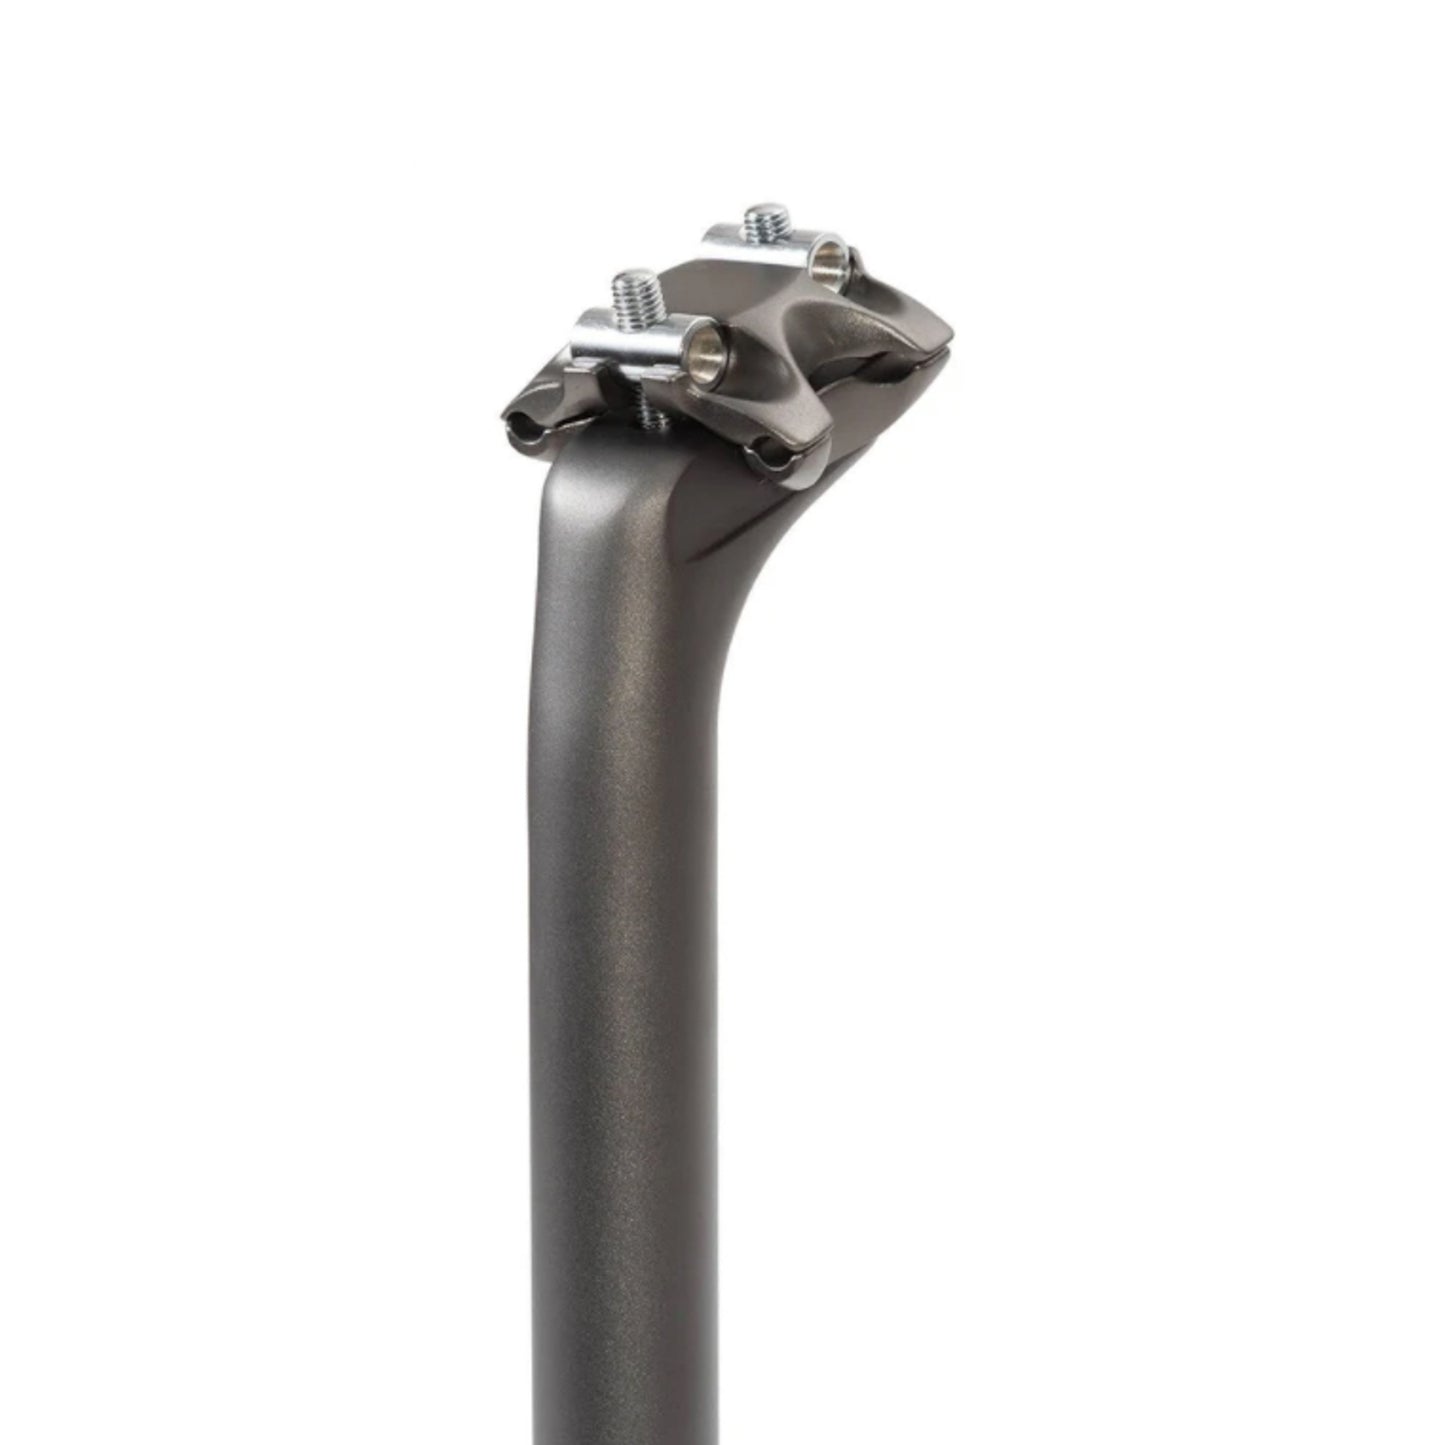 SimWorks Froggy 'Stealth' Seatpost